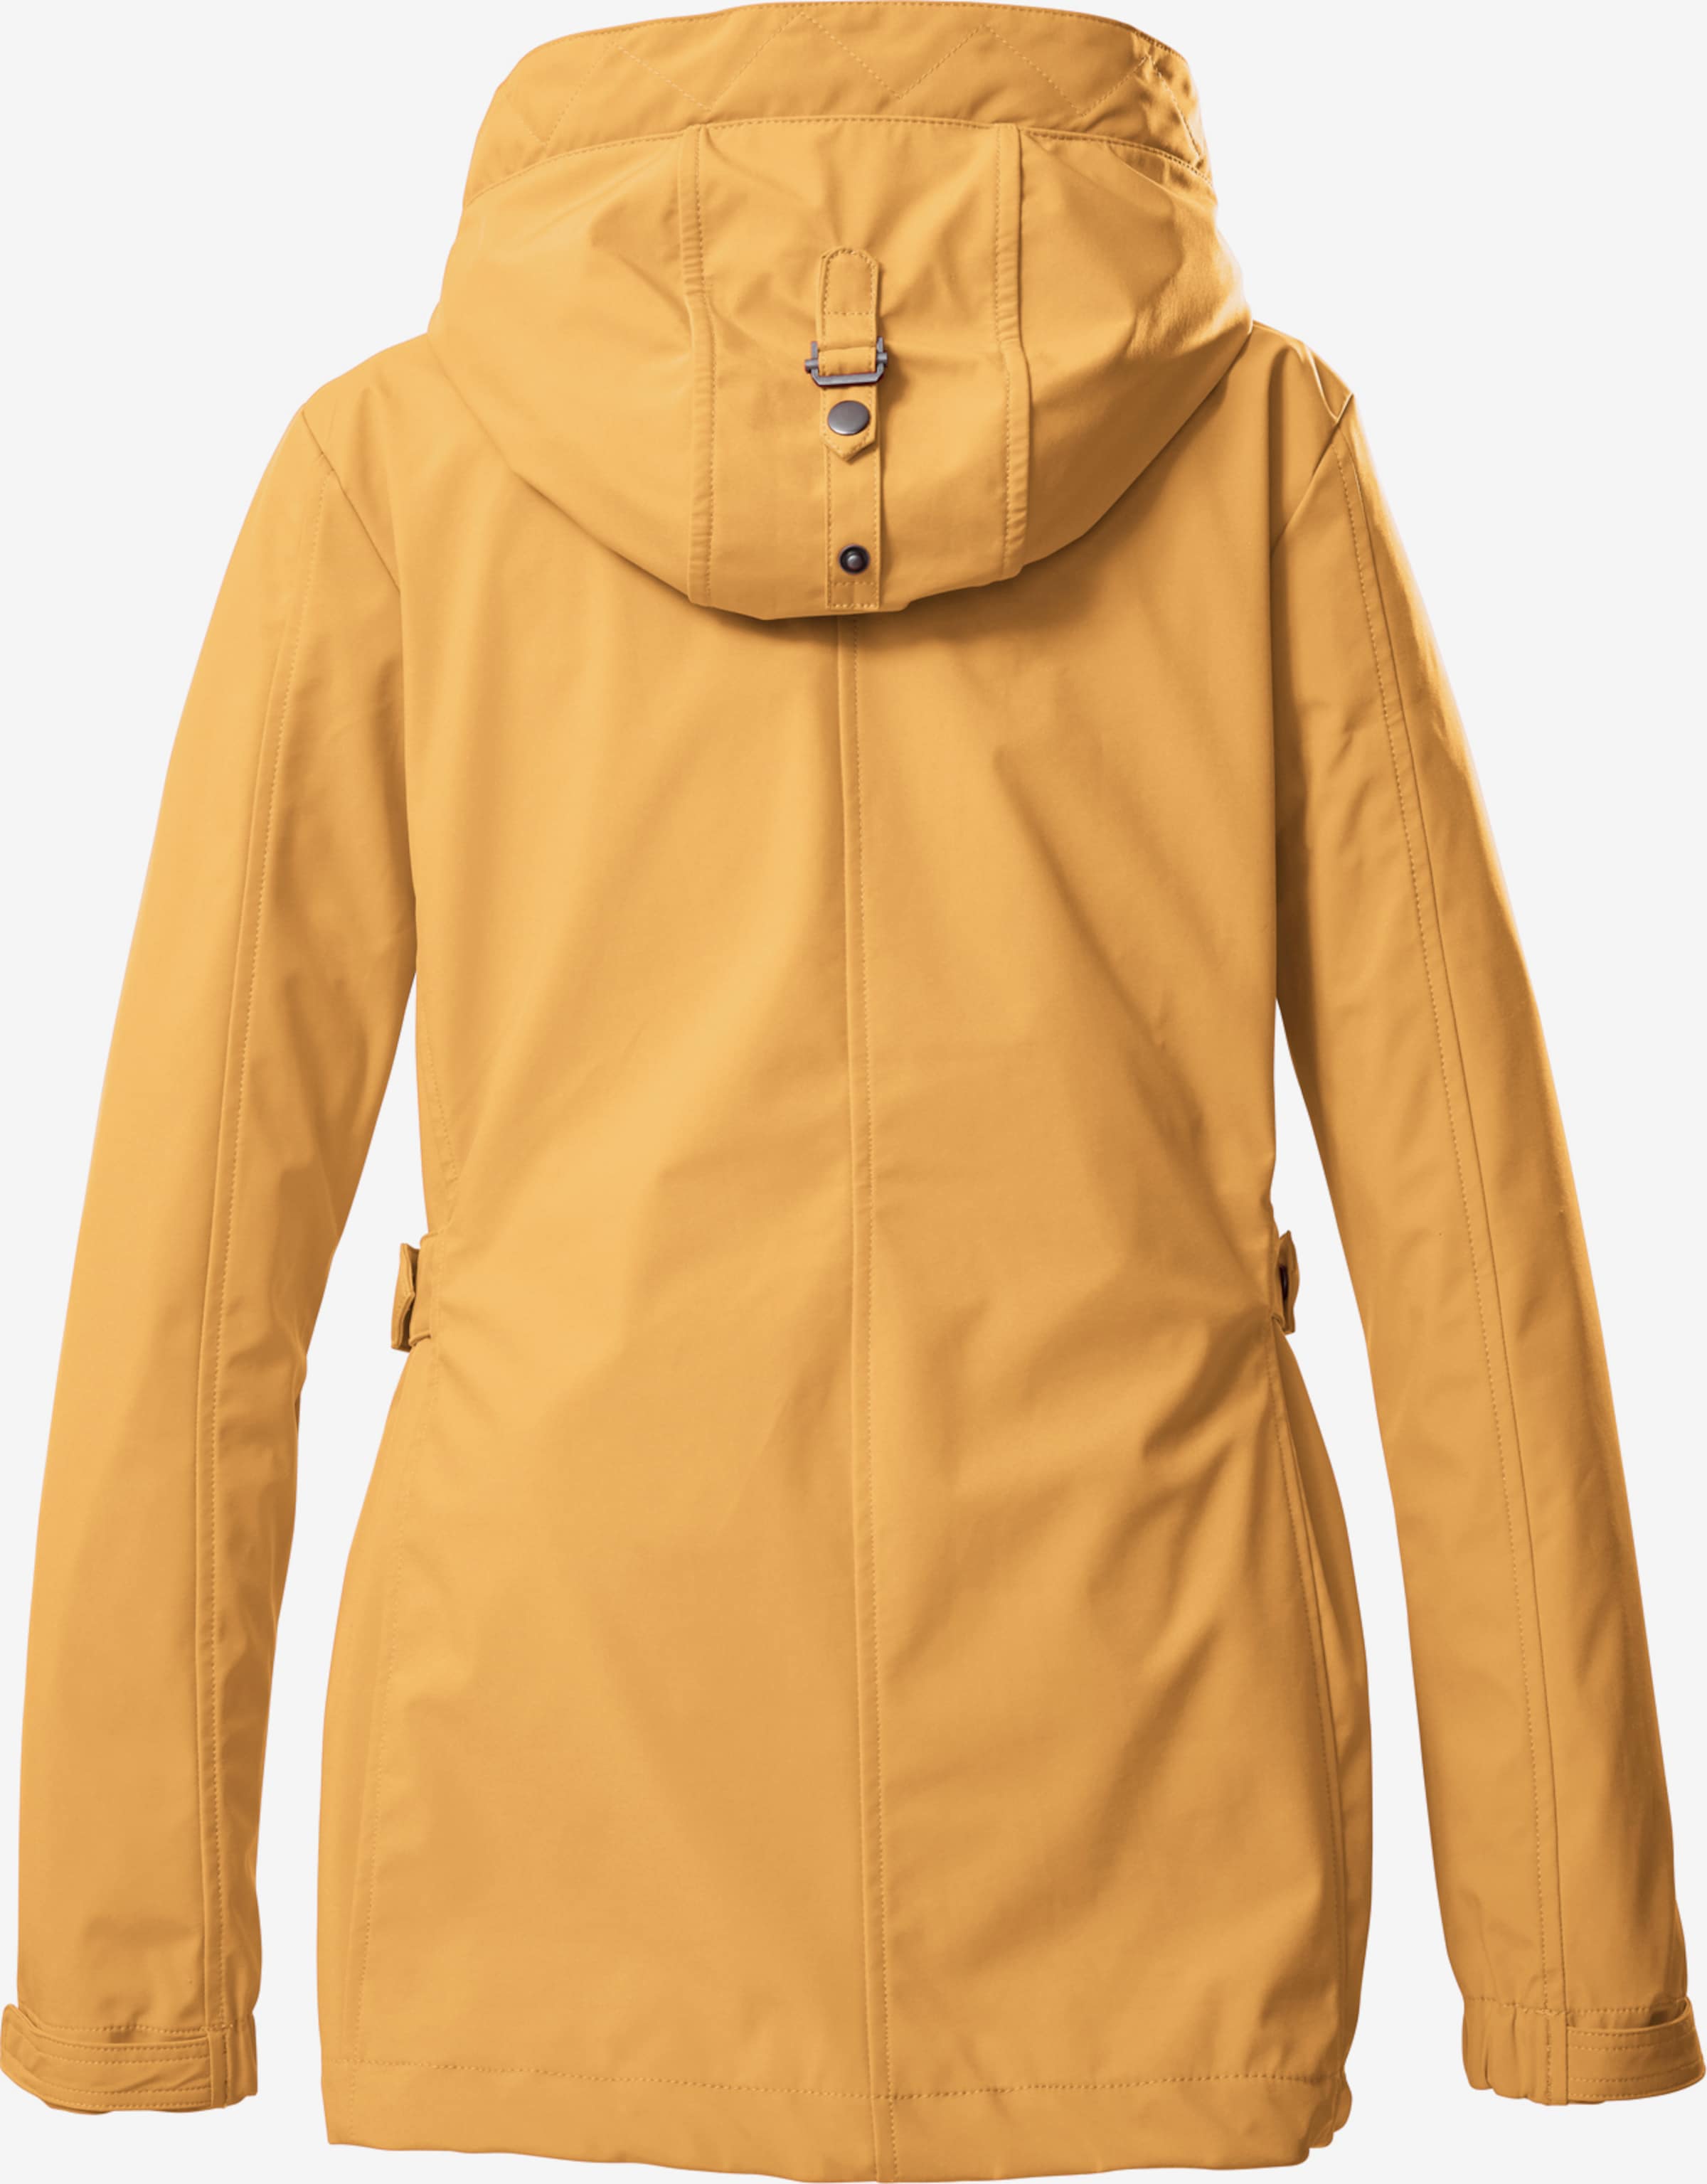 Jacket YOU | G.I.G.A. Yellow ABOUT in killtec Athletic DX by 96\' \'GS